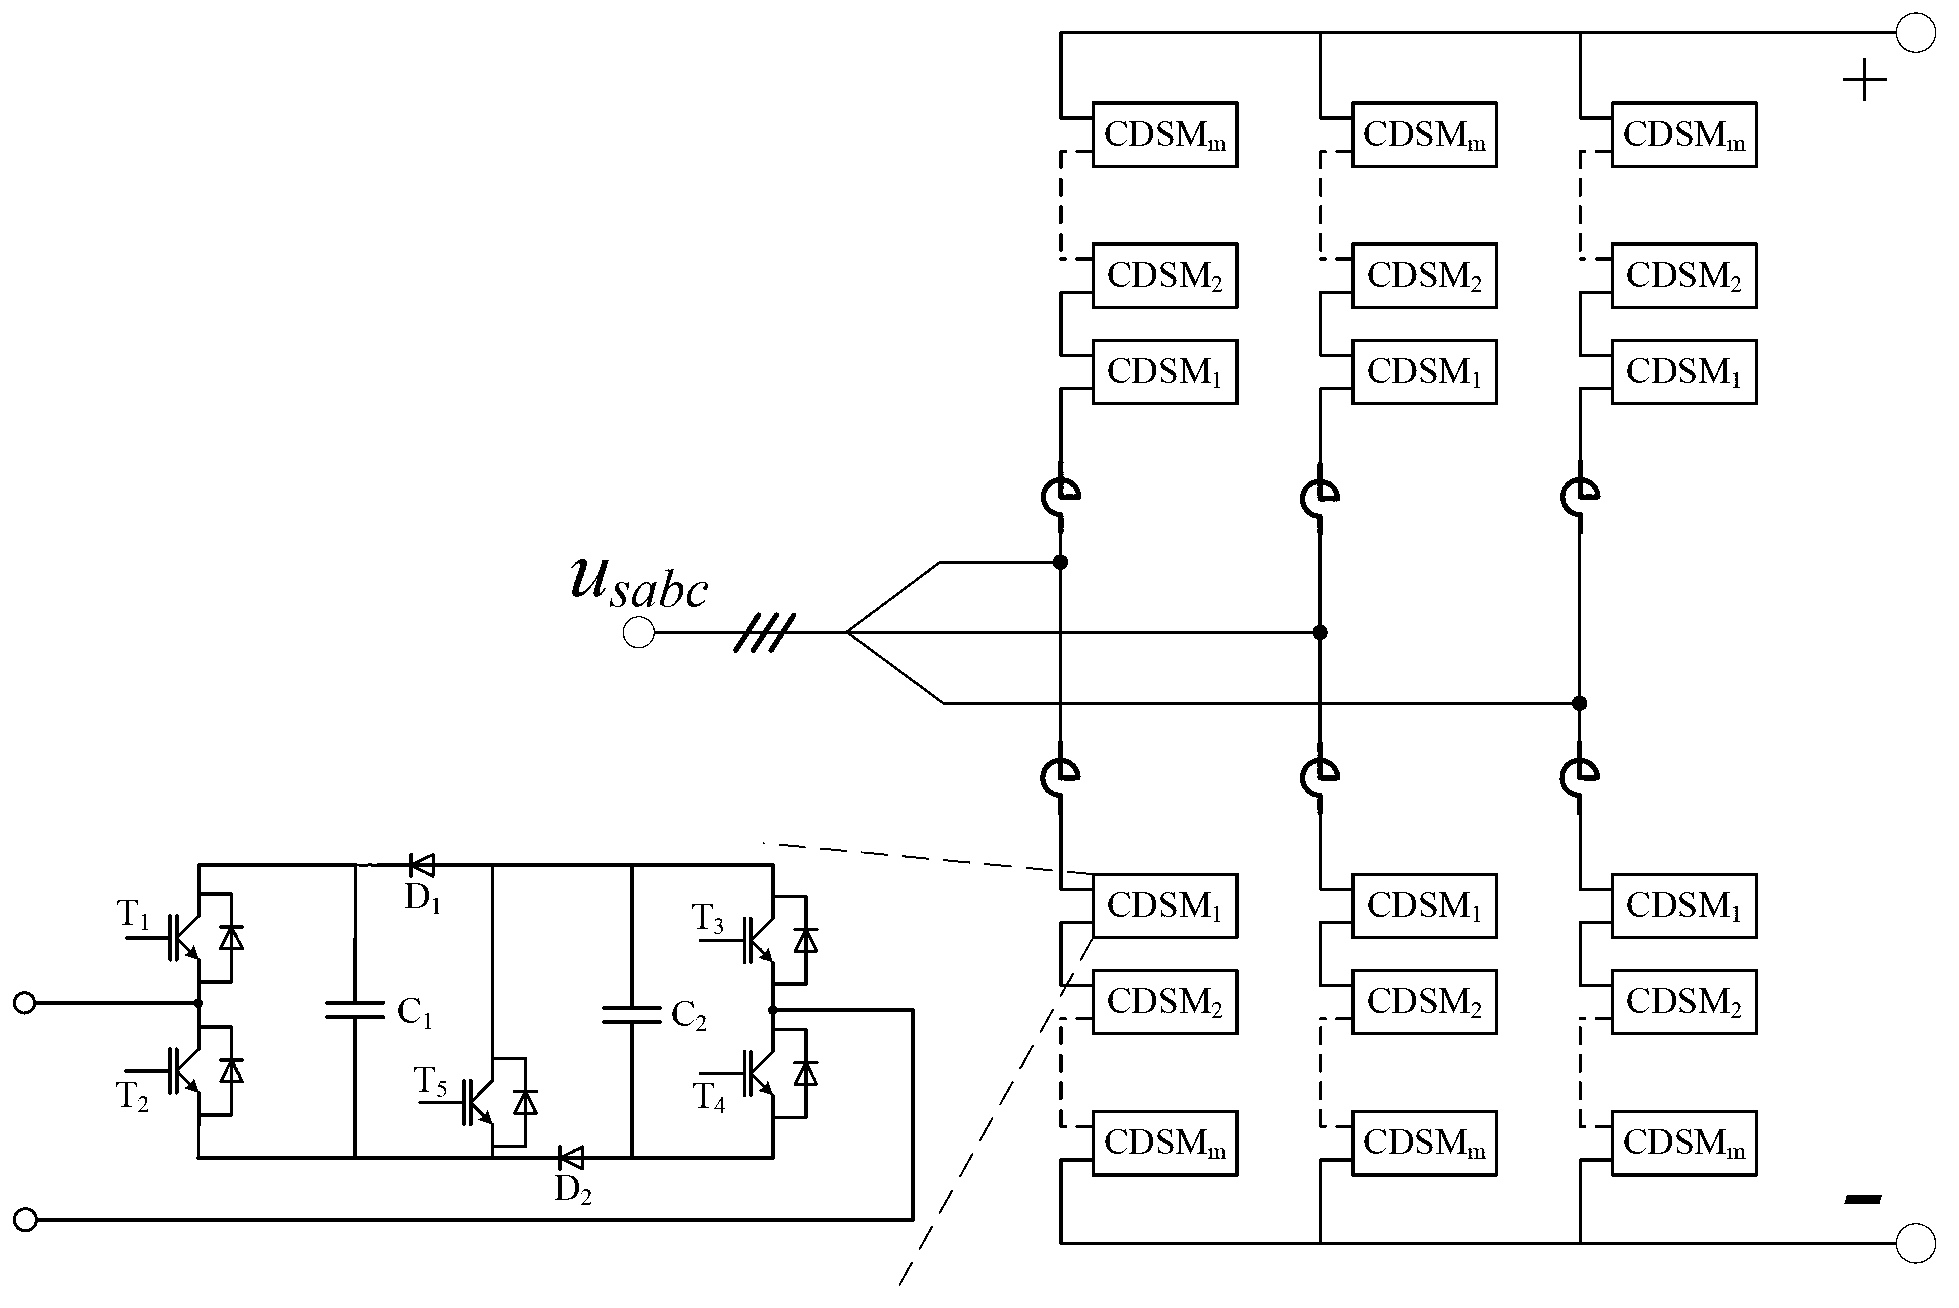 Direct current transmission system based on three-pole type structure